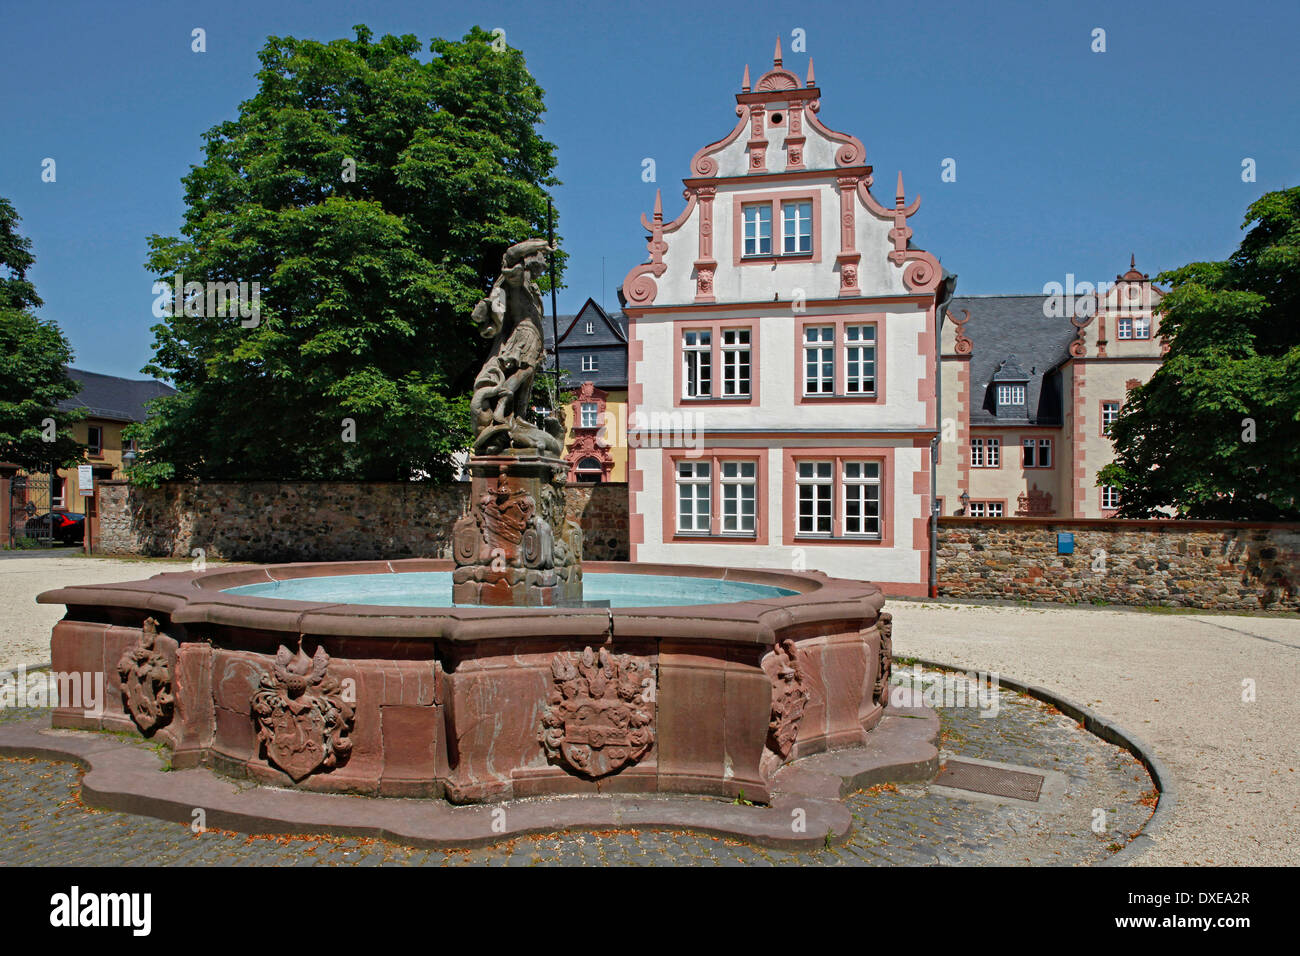 Friedberg Castle and Fountain St George, Friedberg, Hesse, Germany Stock Photo